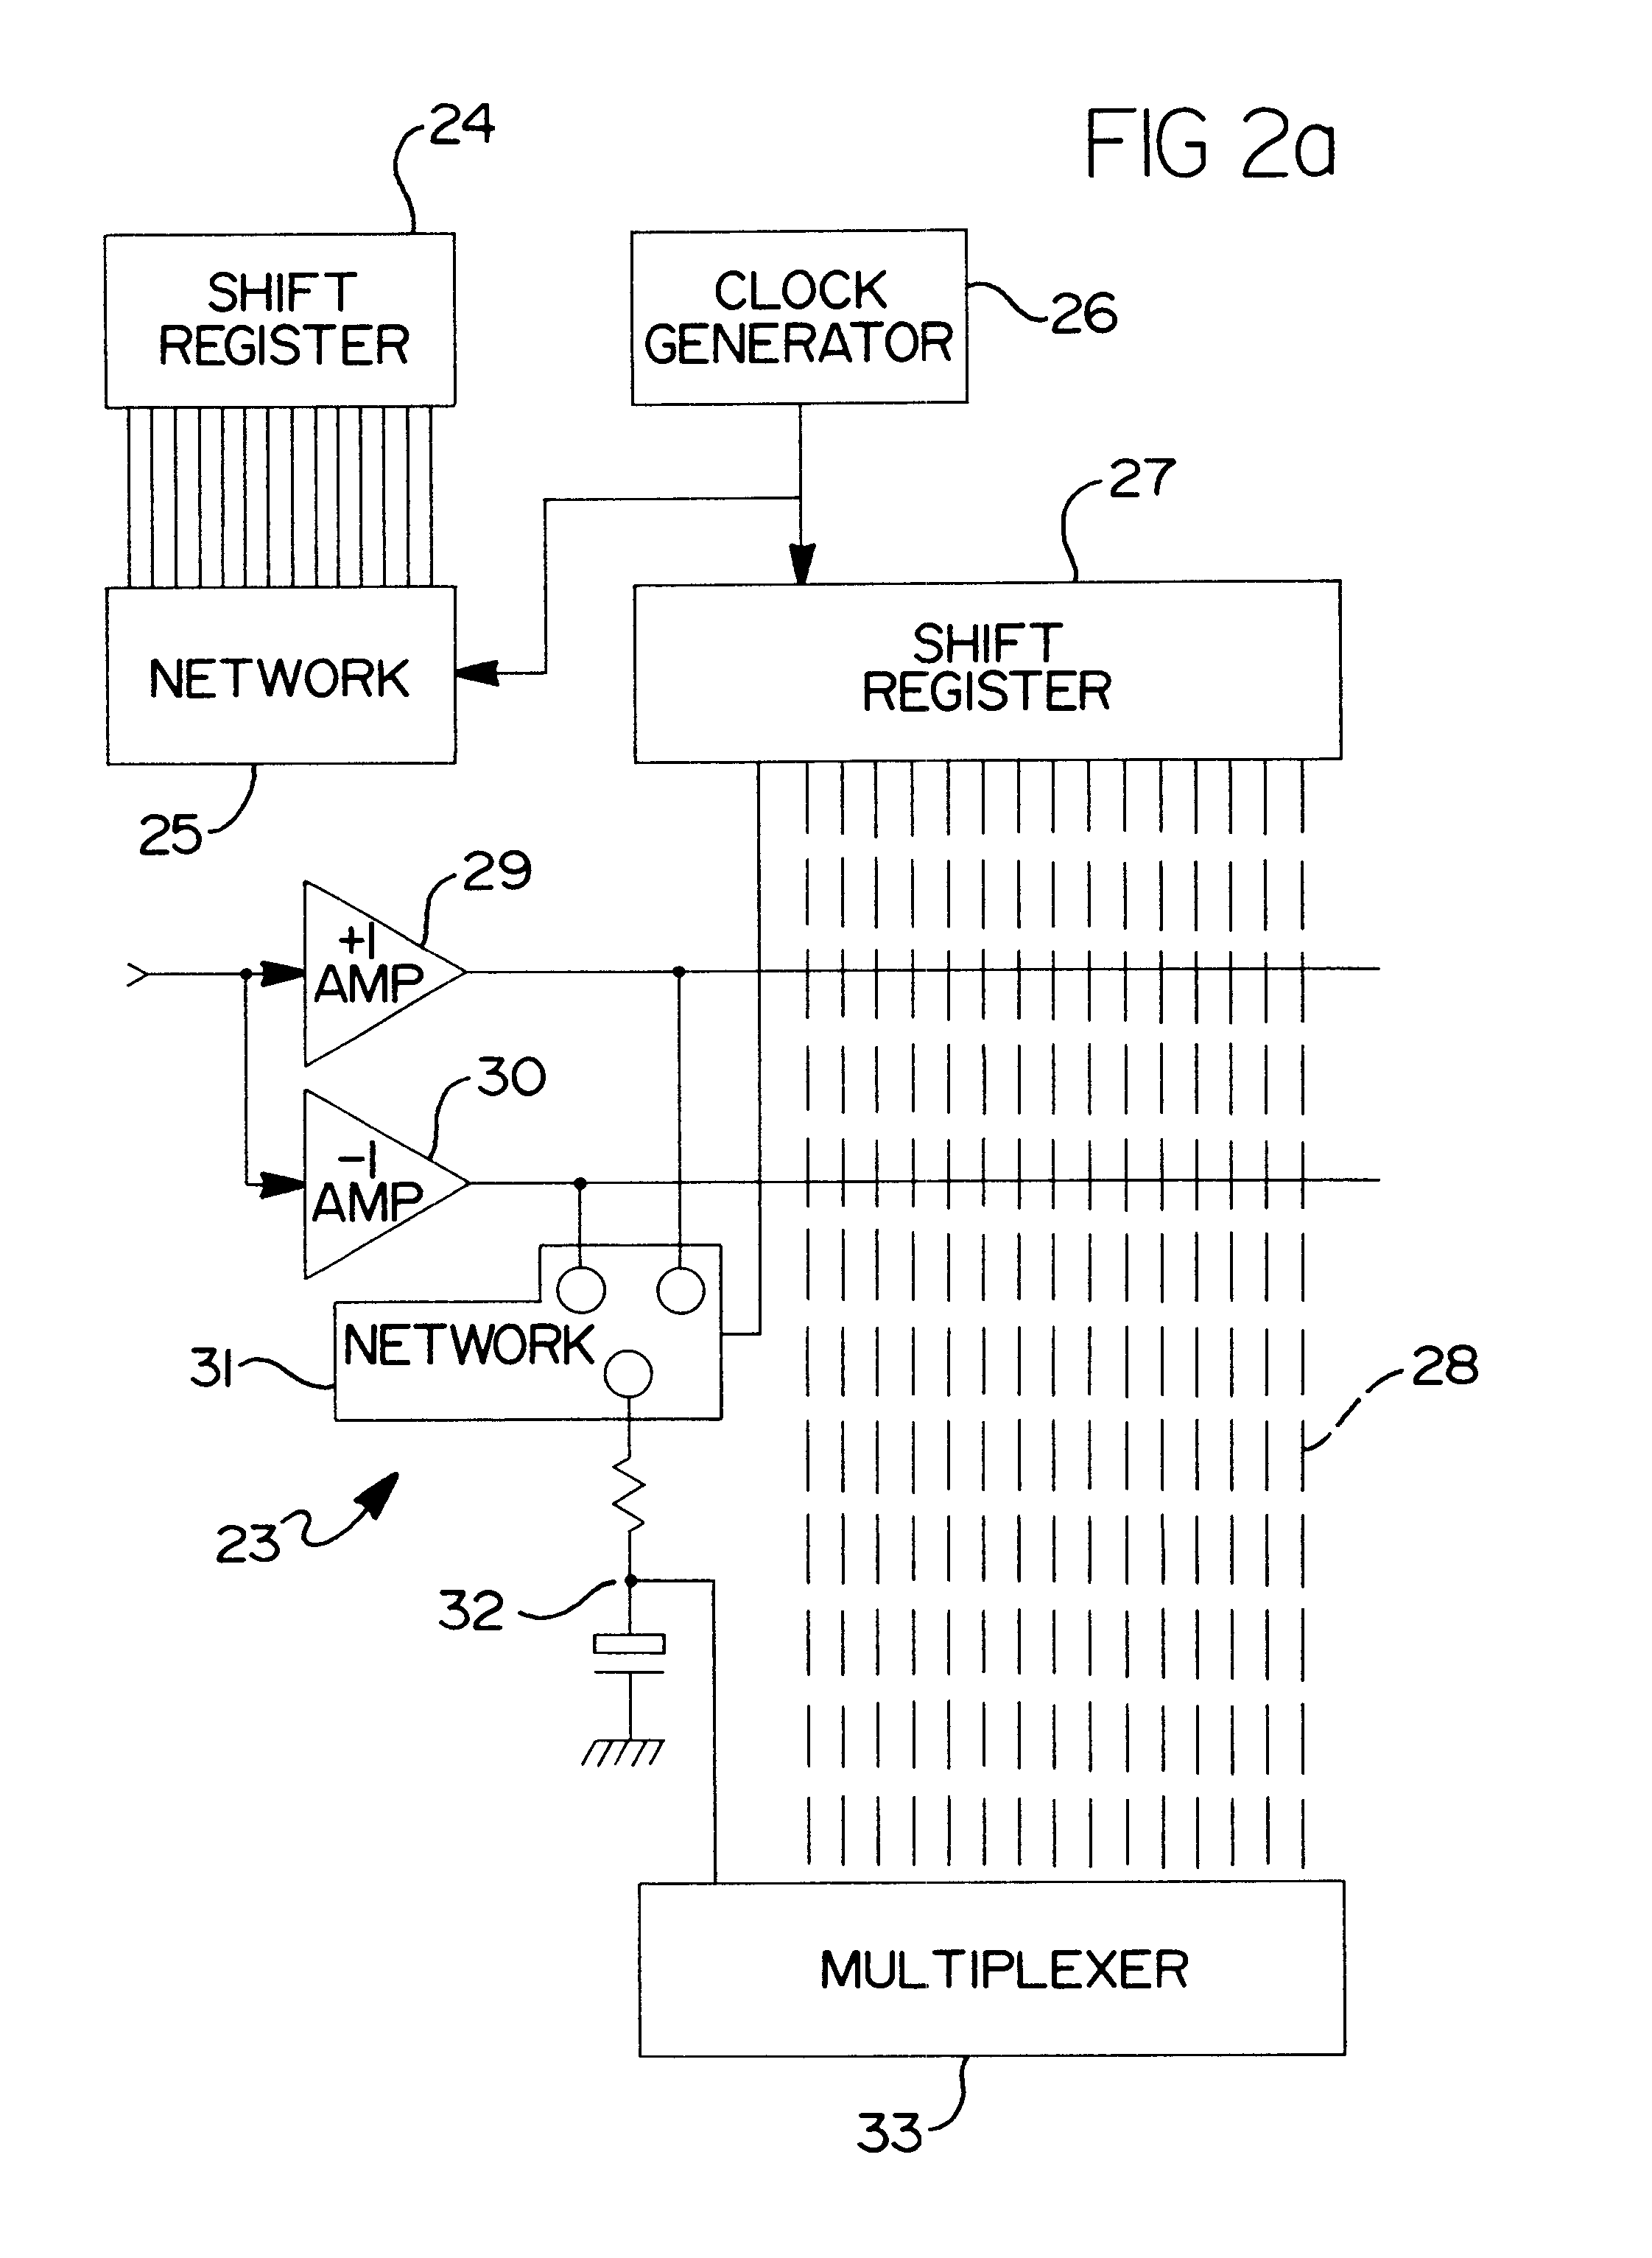 Method and apparatus for distance measurement